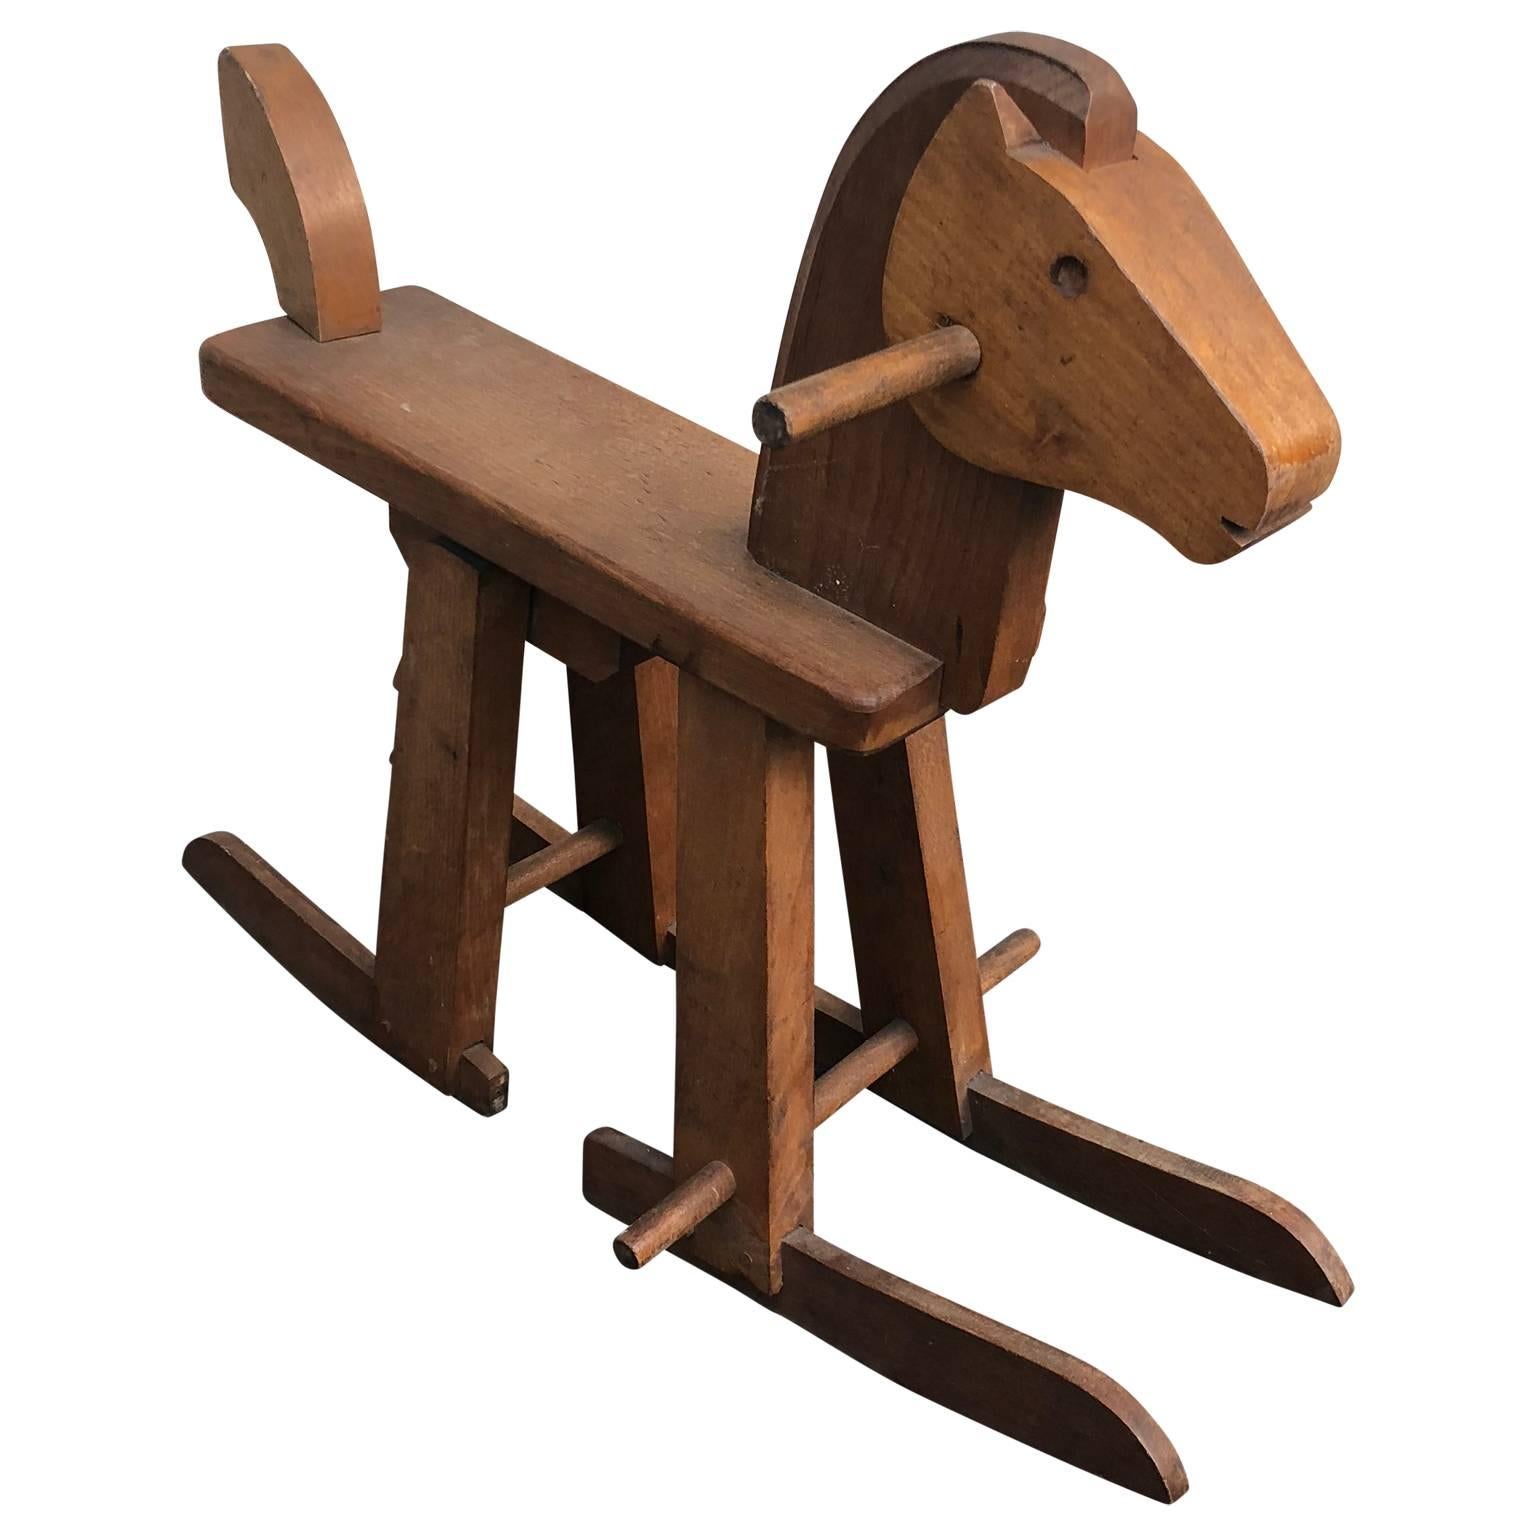 Vintage Kai Bojesen Style Rocking Horse. The child's rocking horse is in classic Danish clean and sturdy design. Perfect for any nursery or child's bedroom, the horse works fine. This is a sweet addition to any child's room.